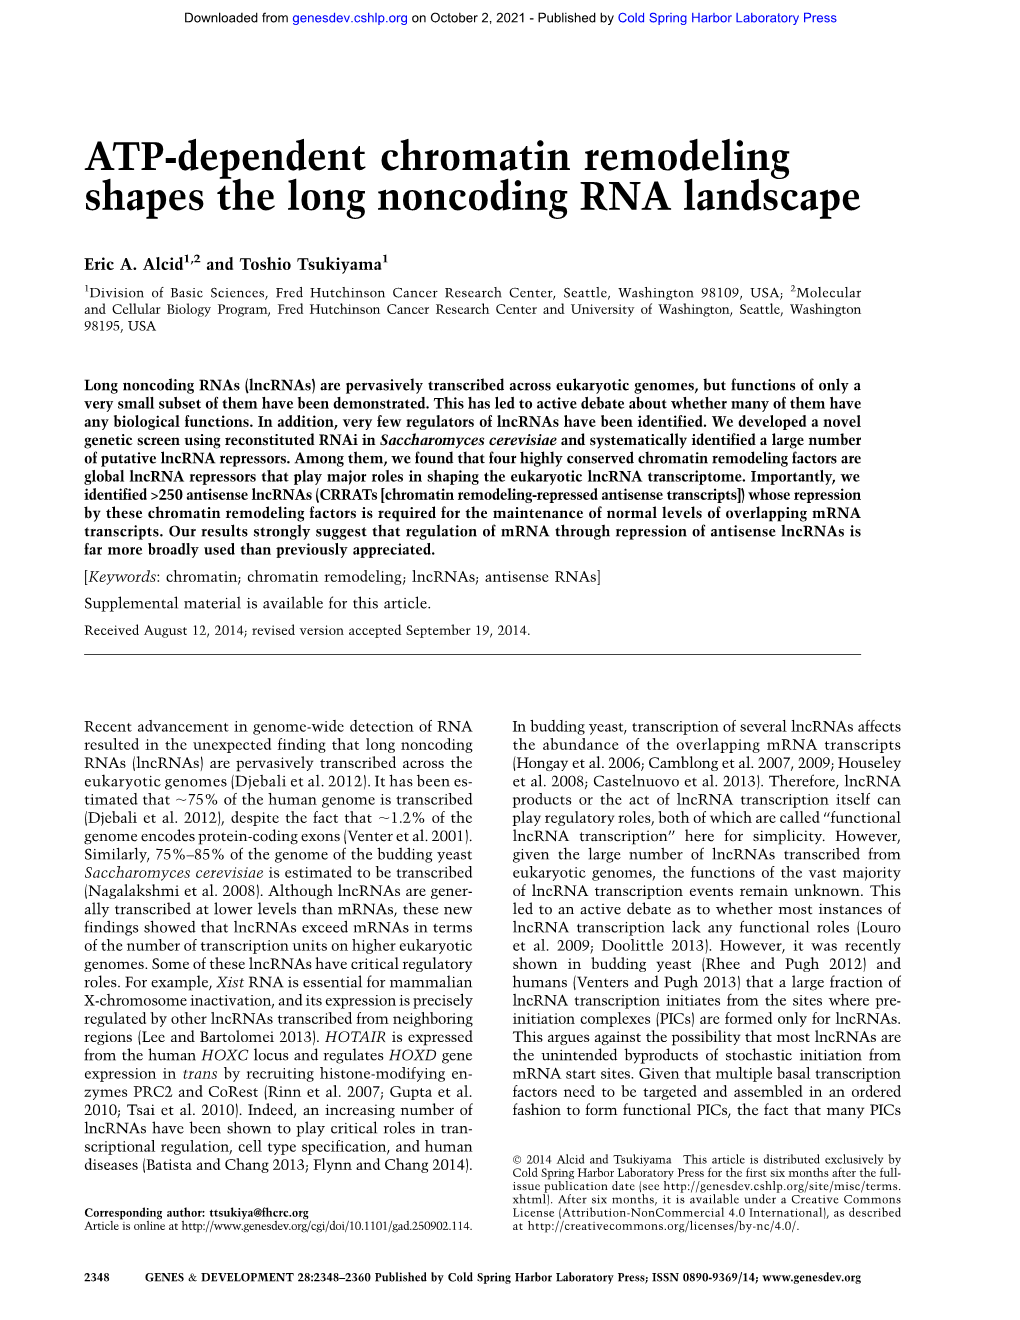 ATP-Dependent Chromatin Remodeling Shapes the Long Noncoding RNA Landscape